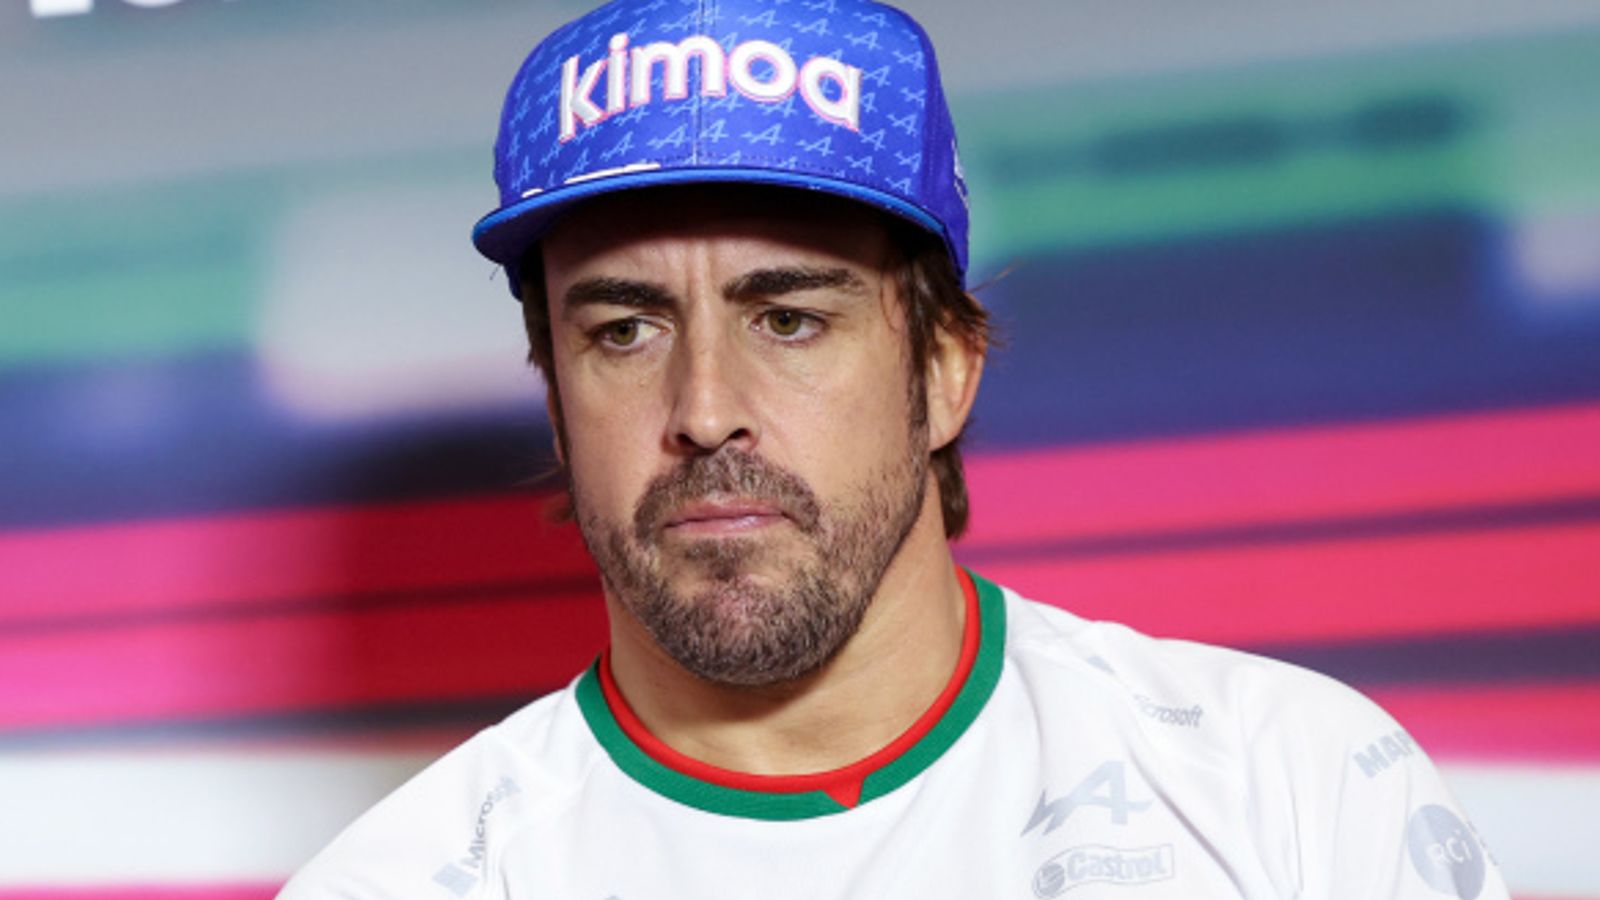 Alpine succeed with appeal as Fernando Alonso retains US GP seventh place